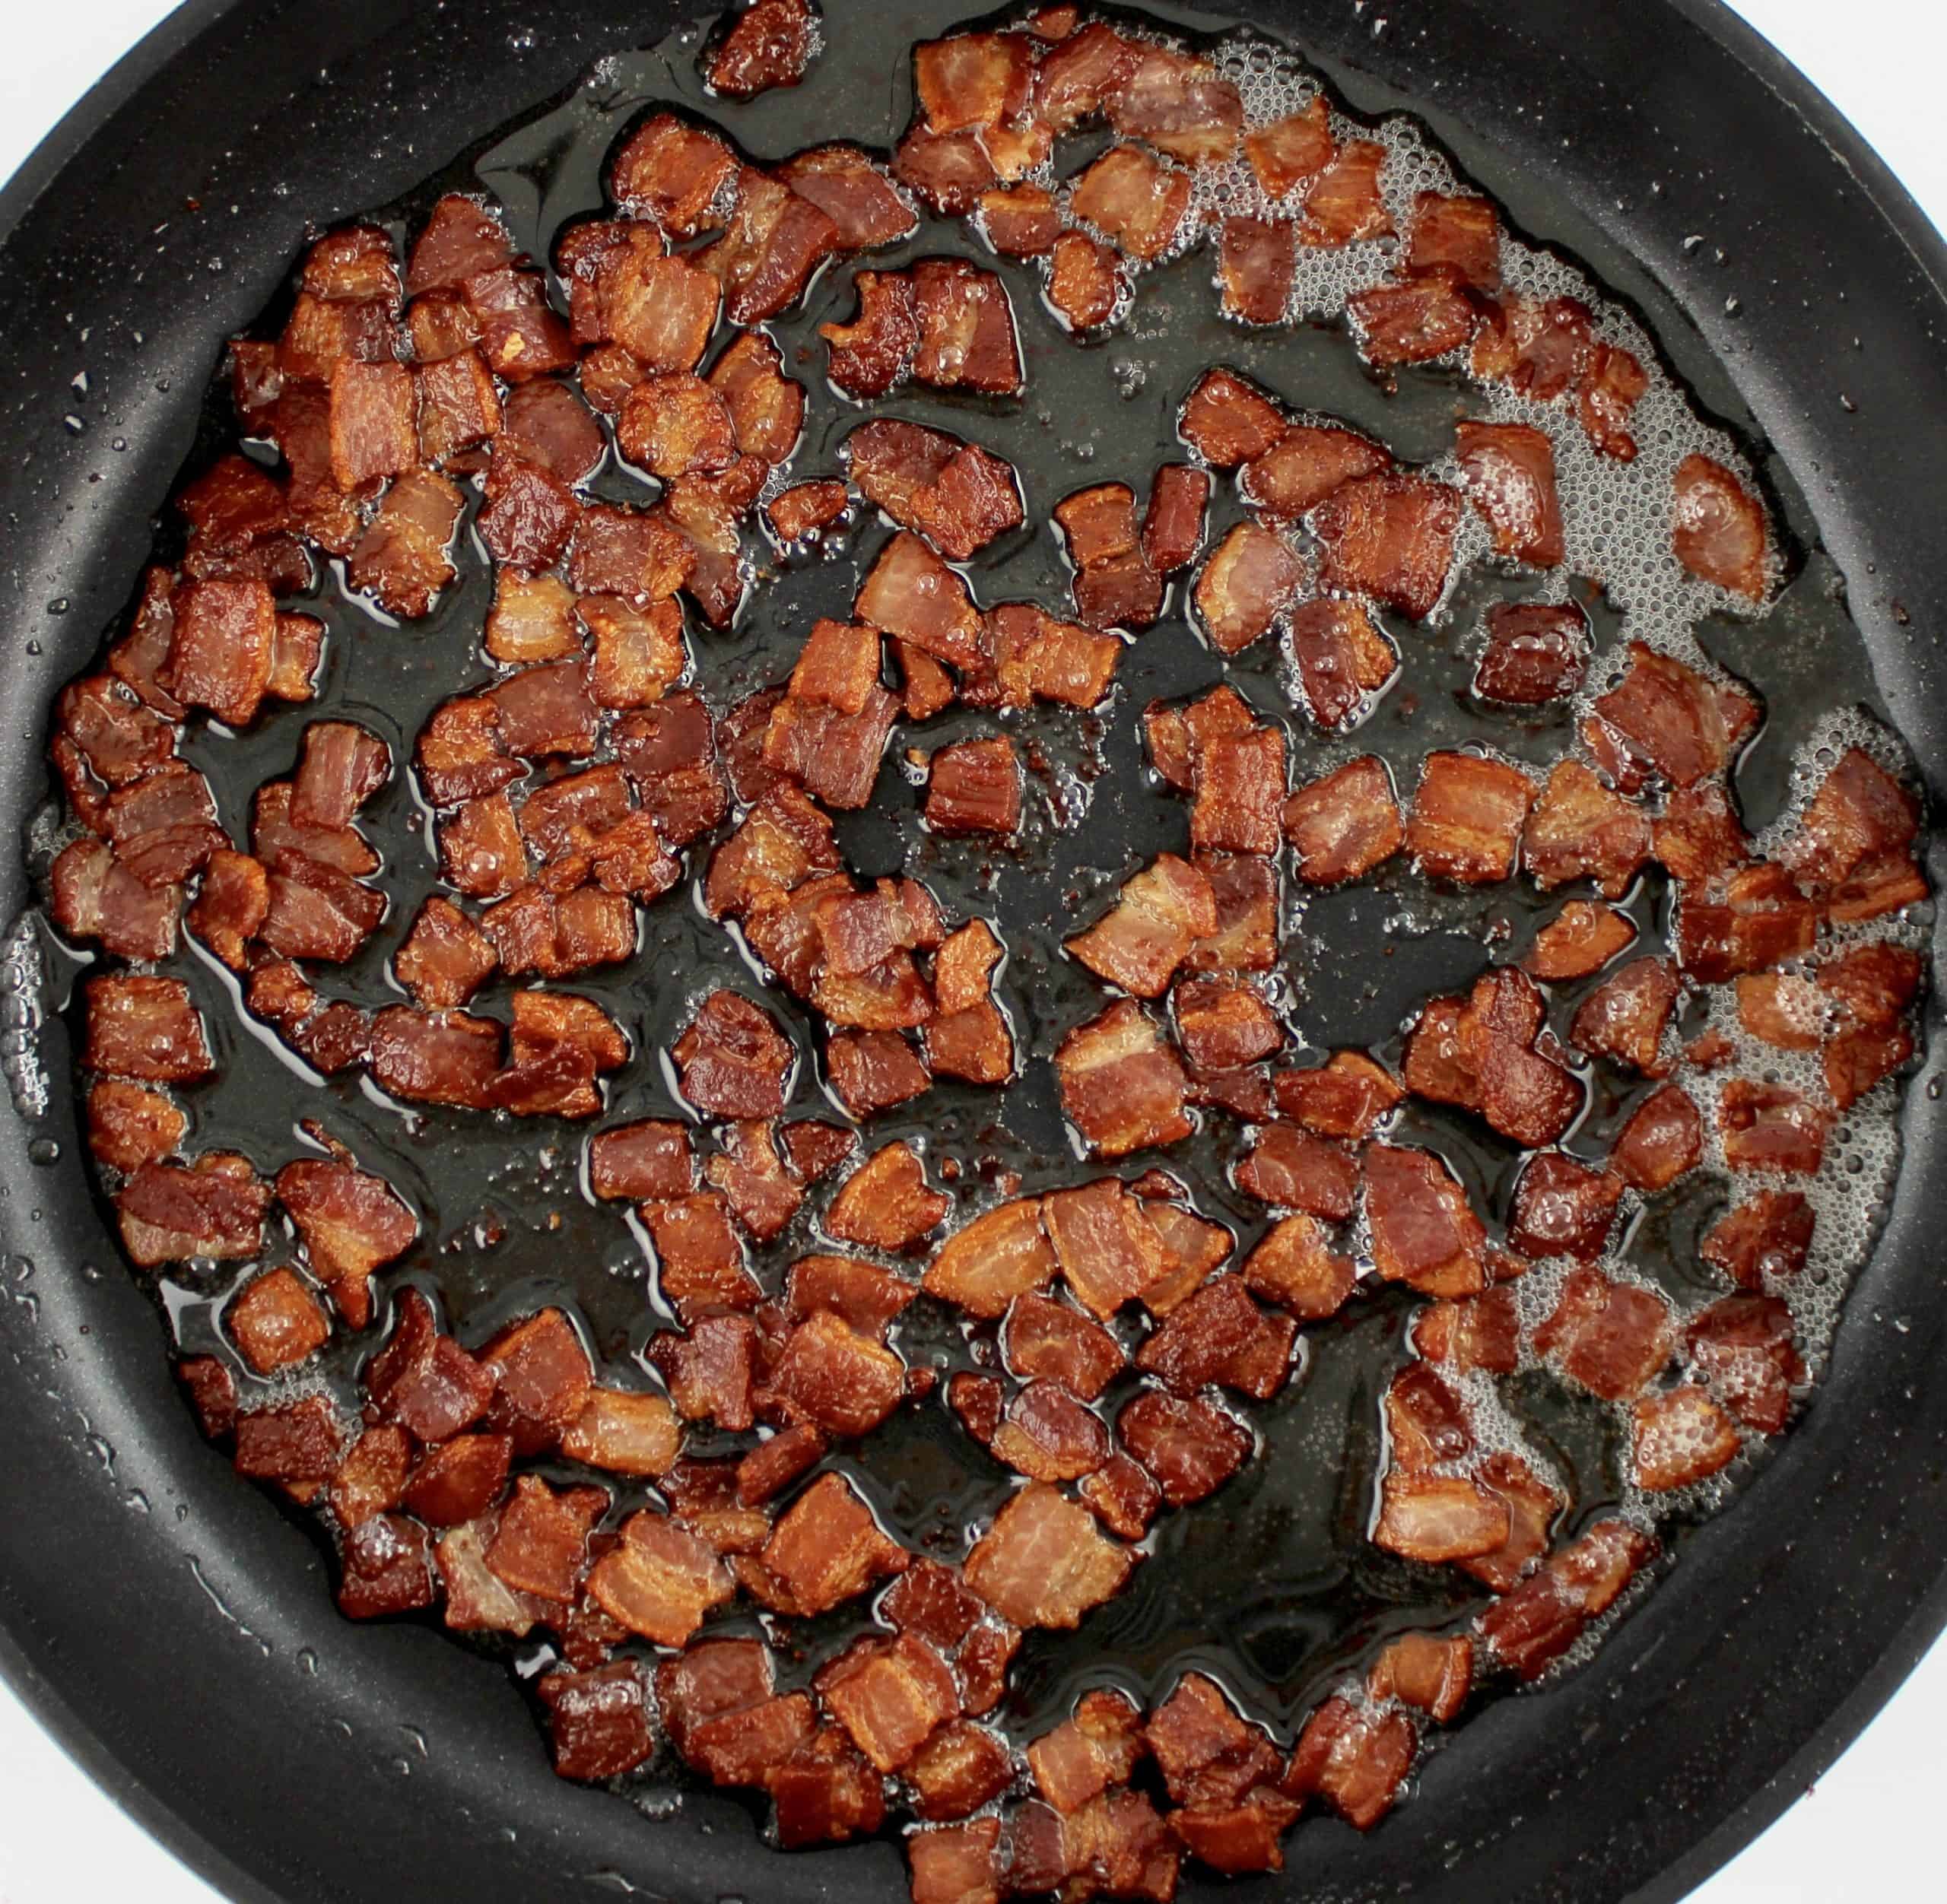 chopped cooked bacon in skillet